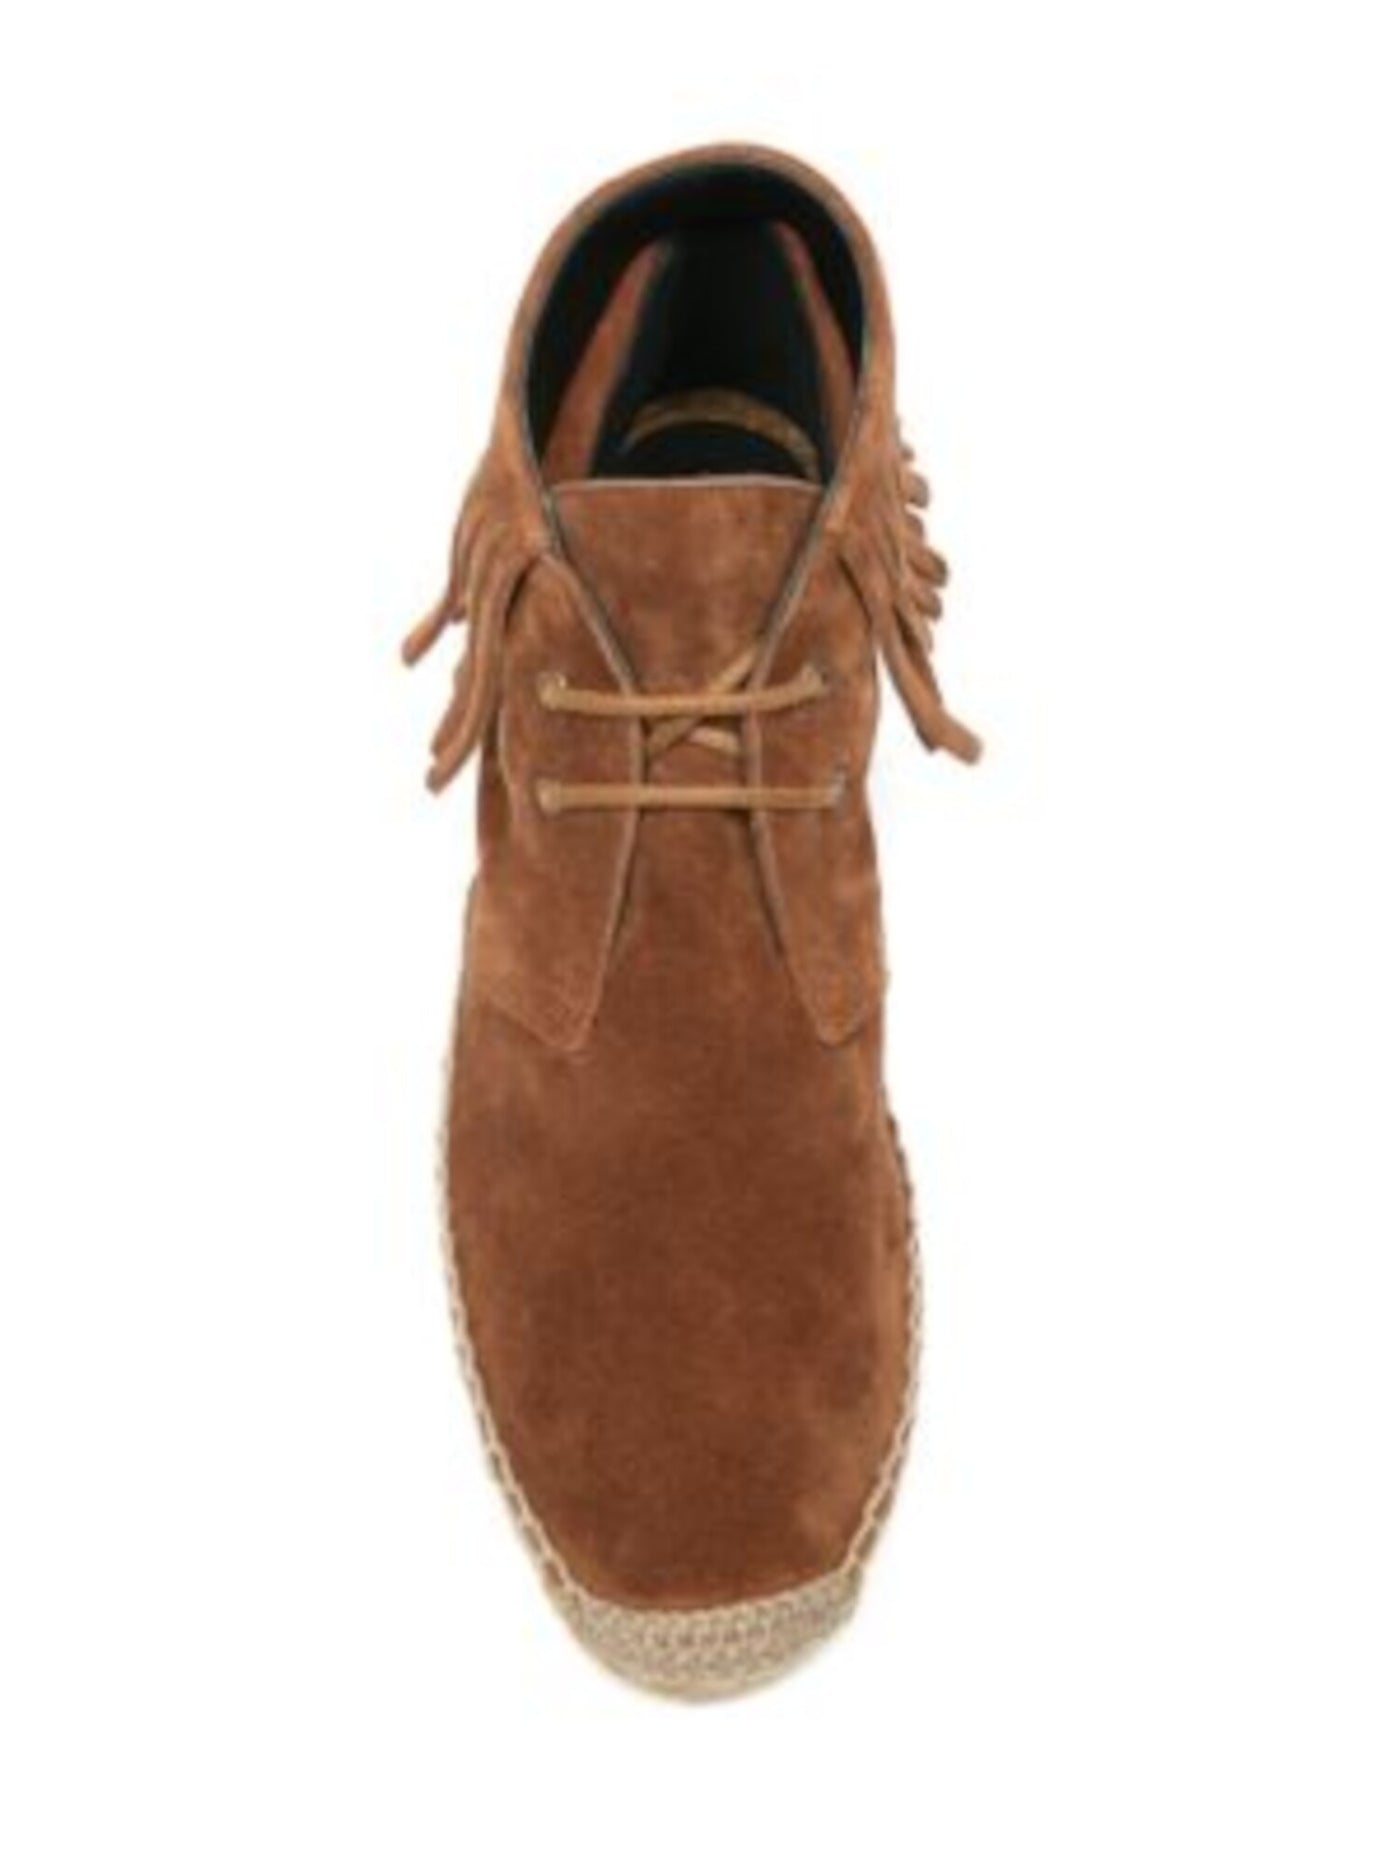 SAINT LAURENT Womens Brown Jute Wrapped Sole Fringed Comfort Florence Round Toe Platform Lace-Up Leather Moccasins Shoes